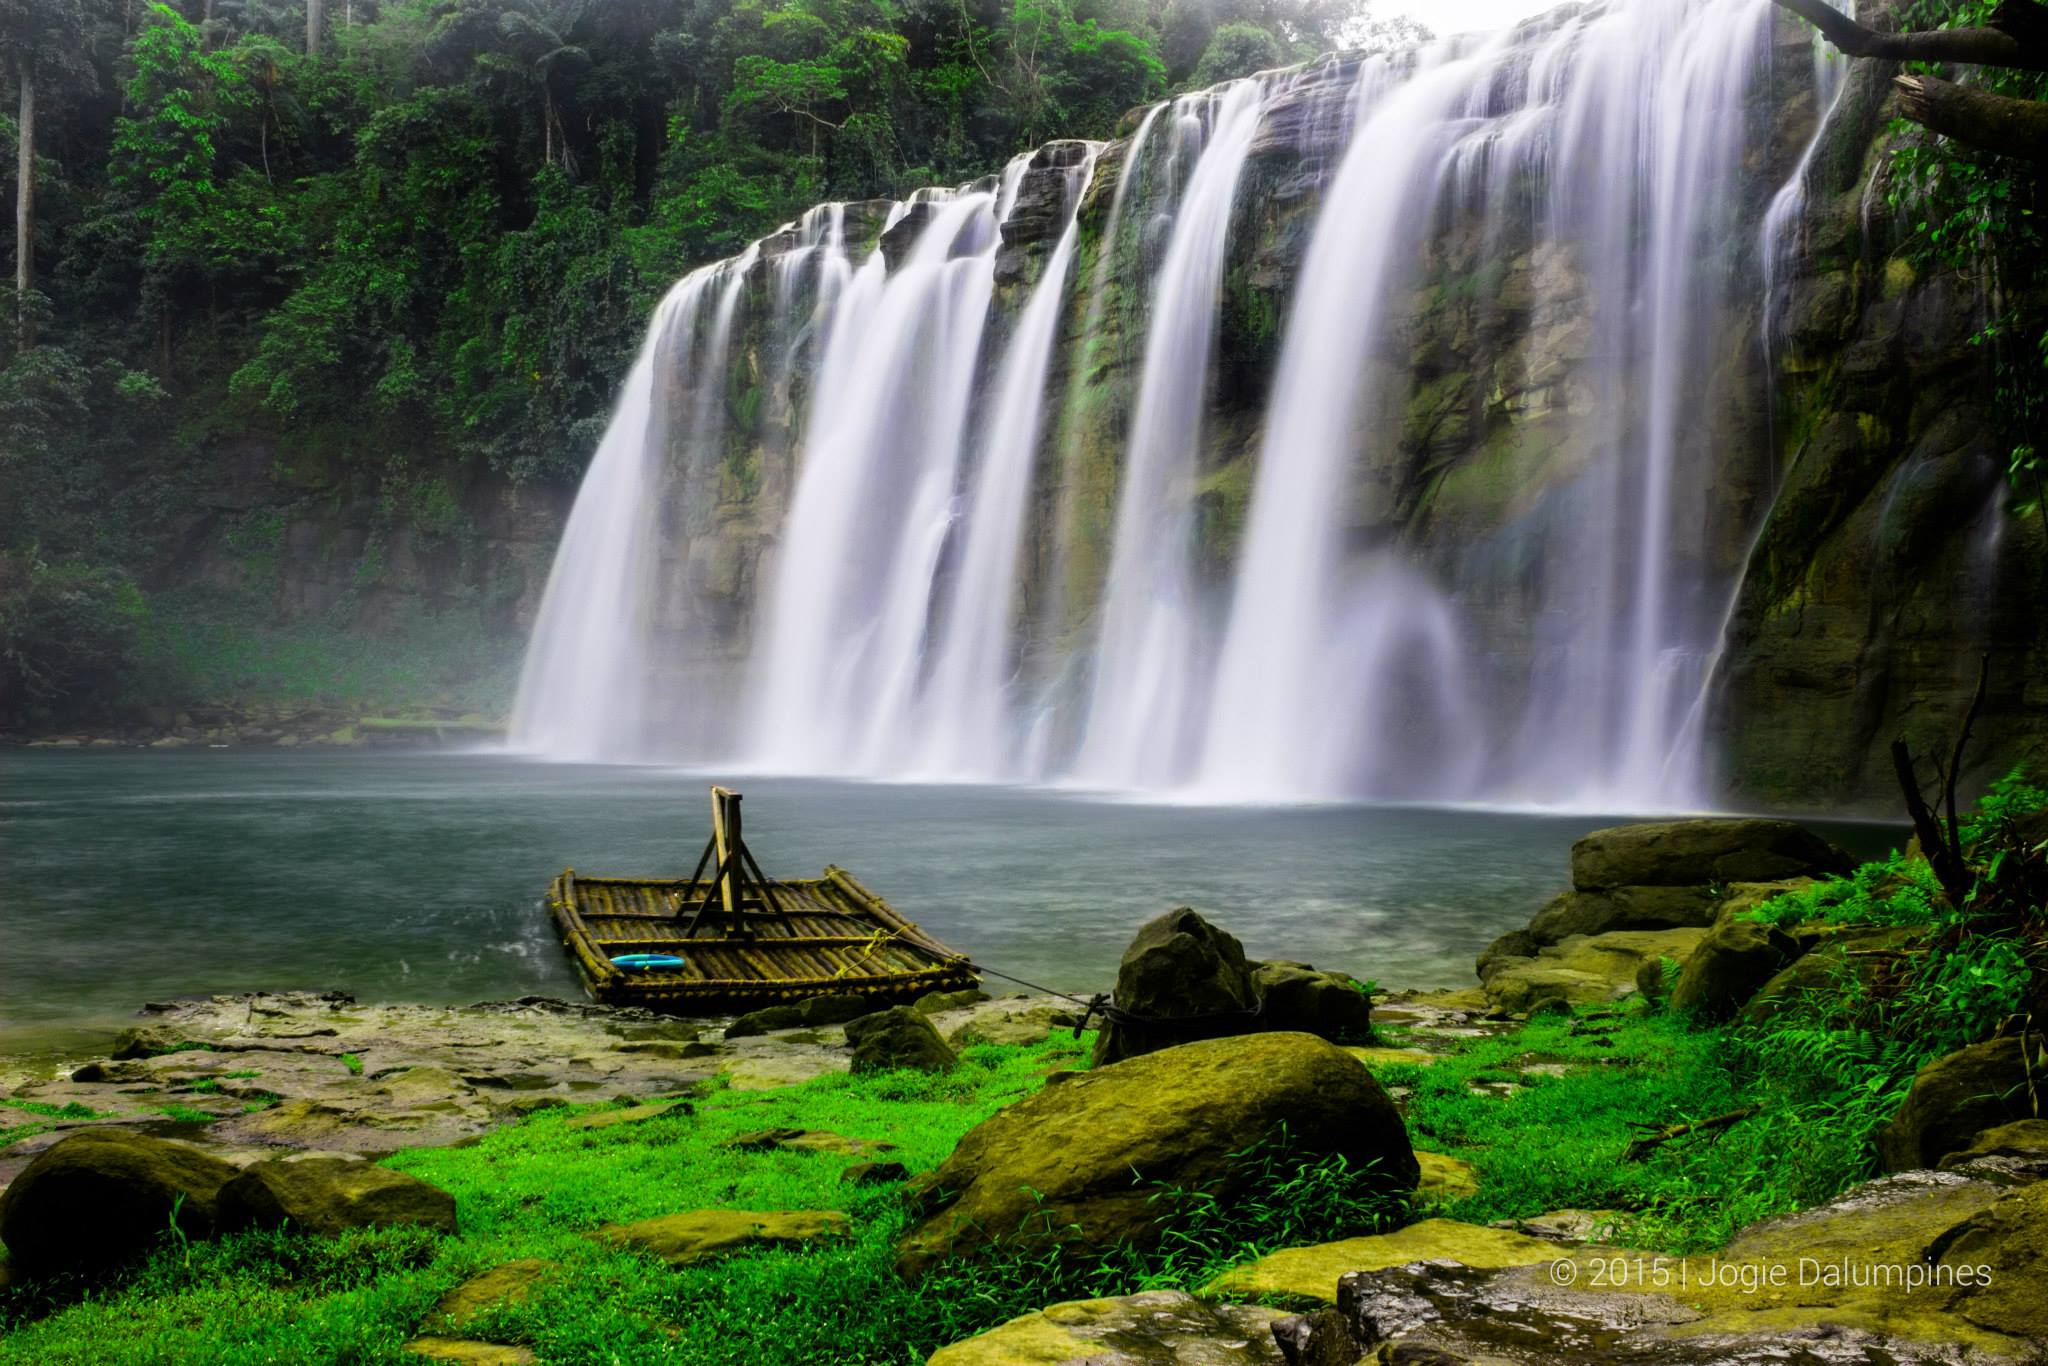 <b class="font-bara"><i class="bi bi-geo-fill h4"></i> TINUY-AN FALLS</b> <br/>Tinuy-an Falls is a multi-tiered waterfall in Bislig, Surigao del Sur in the southern island of Mindanao, Philippines. Bislig is a city known as the Booming City by the Bay. The waterfall itself has been featured in various international travel magazines and TV shows.

The Tinuy-an falls are 95 m wide and 55 metres (180 ft) high, touted as the little Niagara Falls of the Philippines. Tinuy-an is a white water curtain that flows in three levels (with a fourth tier hidden from view) and is said to be the widest waterfall in the Philippines. Every morning, the area shows a rainbow between 9 a.m. to 11 a.m. One may also ride a raft to get close to its cascades and get a water “massage.”

Tinuy-an Falls is a co-management effort between the tourism office of Bislig and the Manobo Tribal Council.